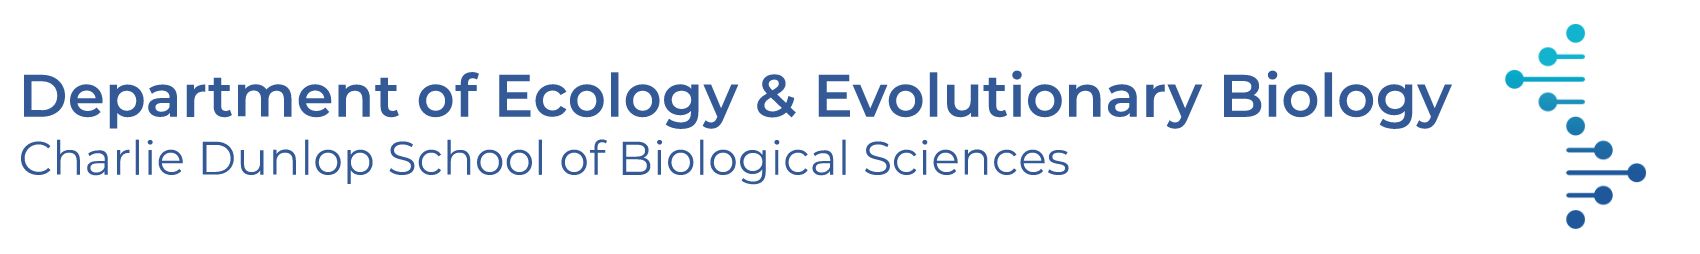 UC Irvine Department of Ecology and Evolutionary Biology